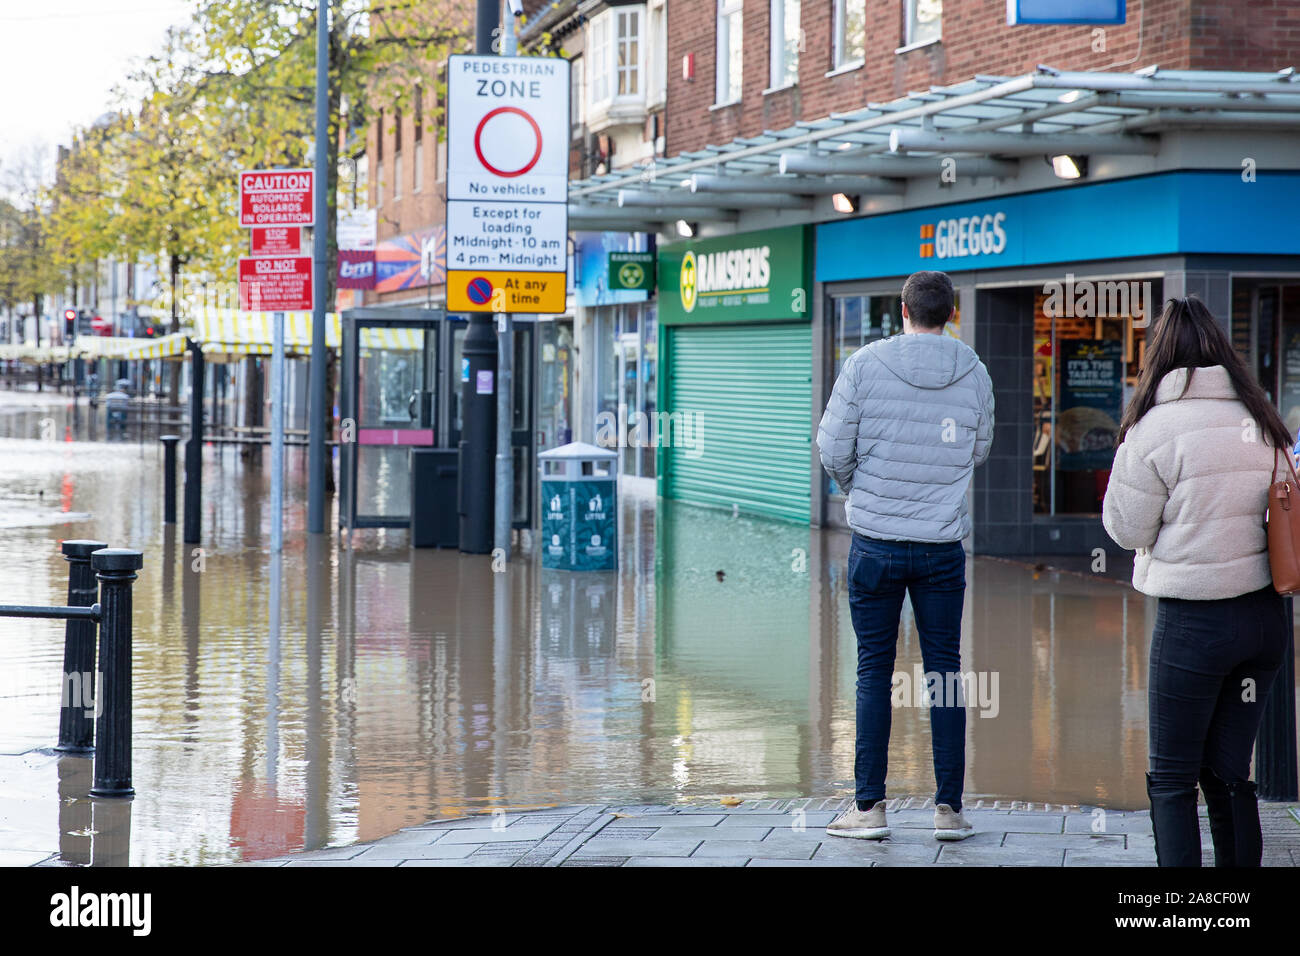 Worksop, UK. 8th November 2019. Flooding in Worksop, UK, following heavy rain which caused the River Ryton to burst it's banks. Credit: Andy Gallagher/Alamy Live News Stock Photo